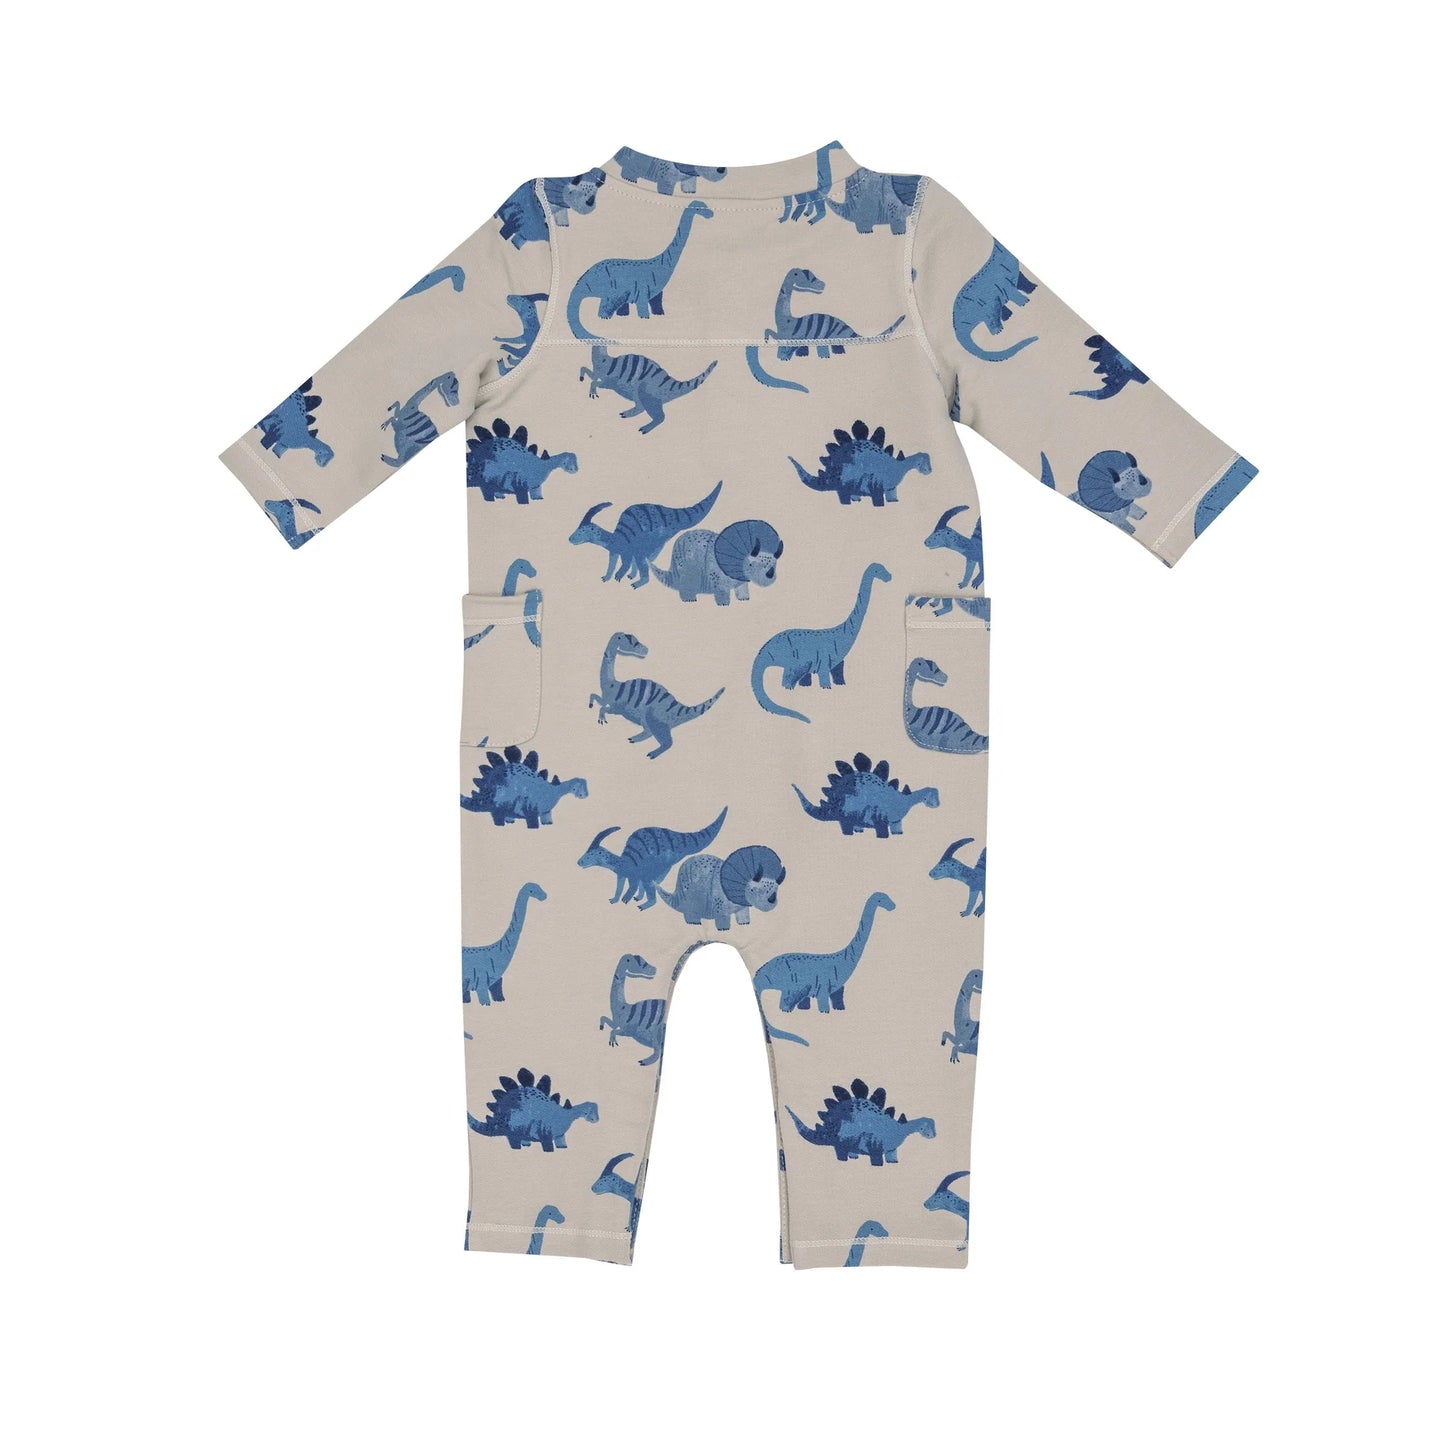 French Terry Romper in Dino Friends  - Doodlebug's Children's Boutique